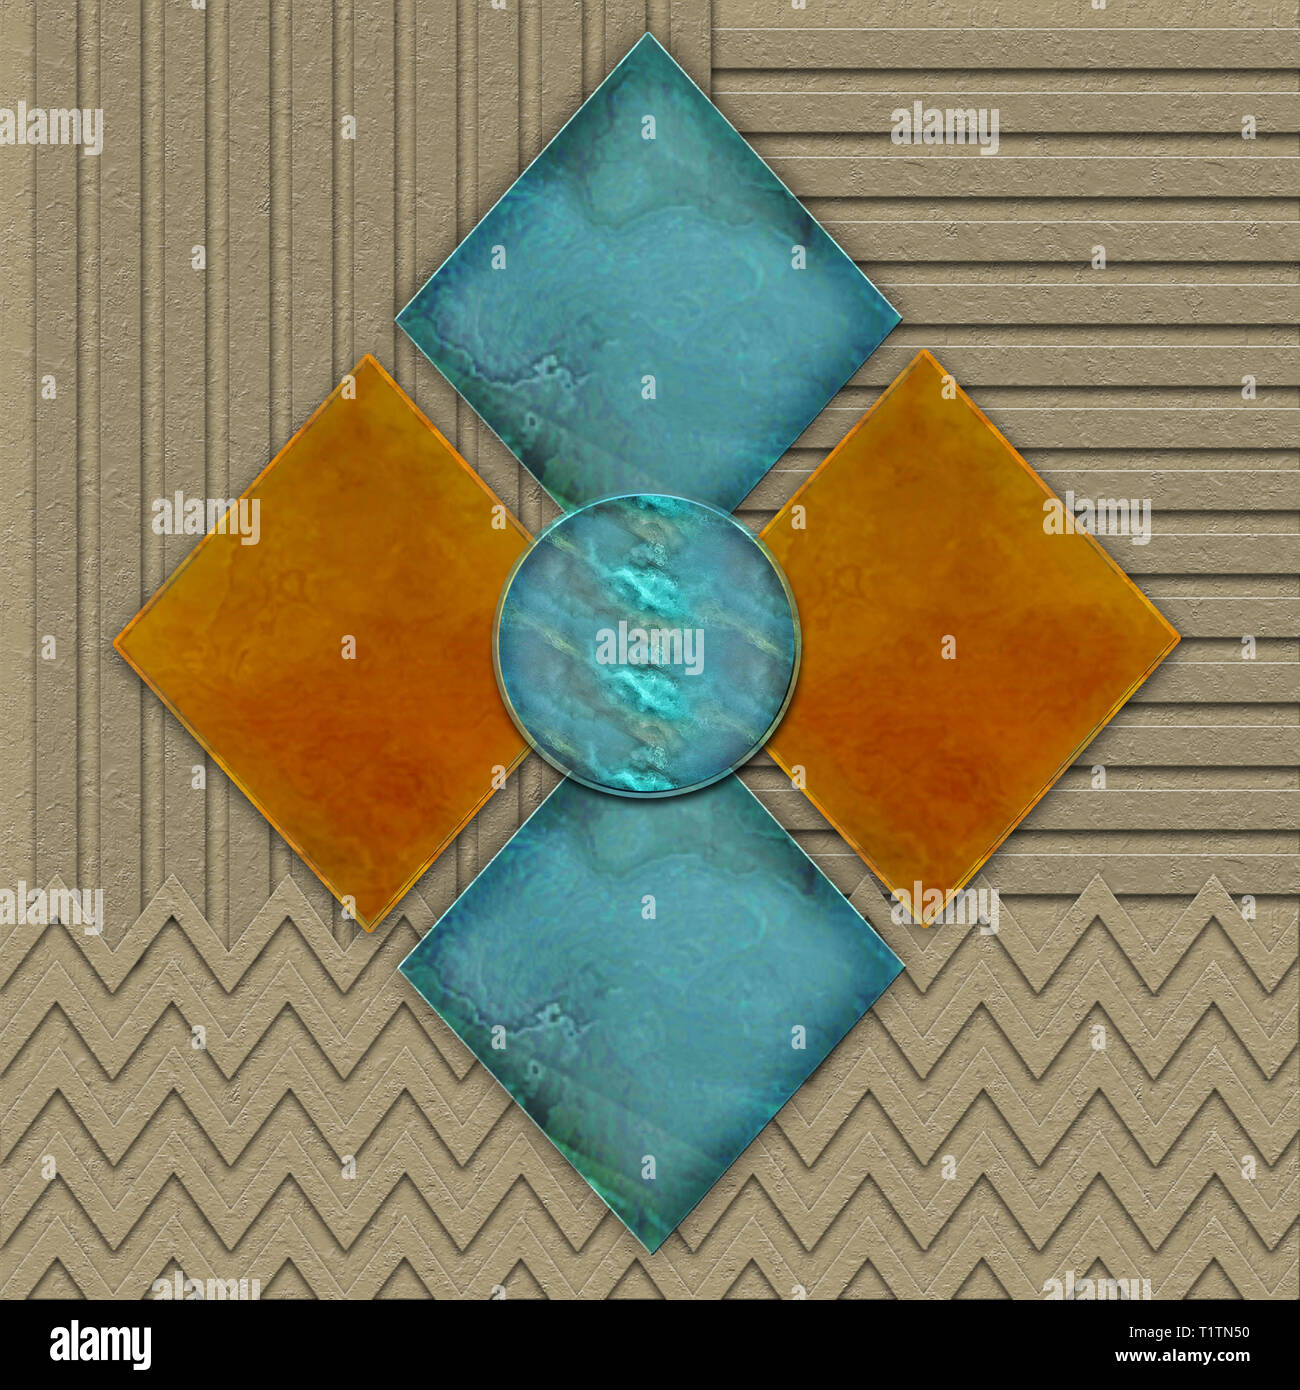 Geometric Graphic Background in brown tones with textured effects.  Marble-like Diamond shapes in turquoise blue and orange. Stock Photo